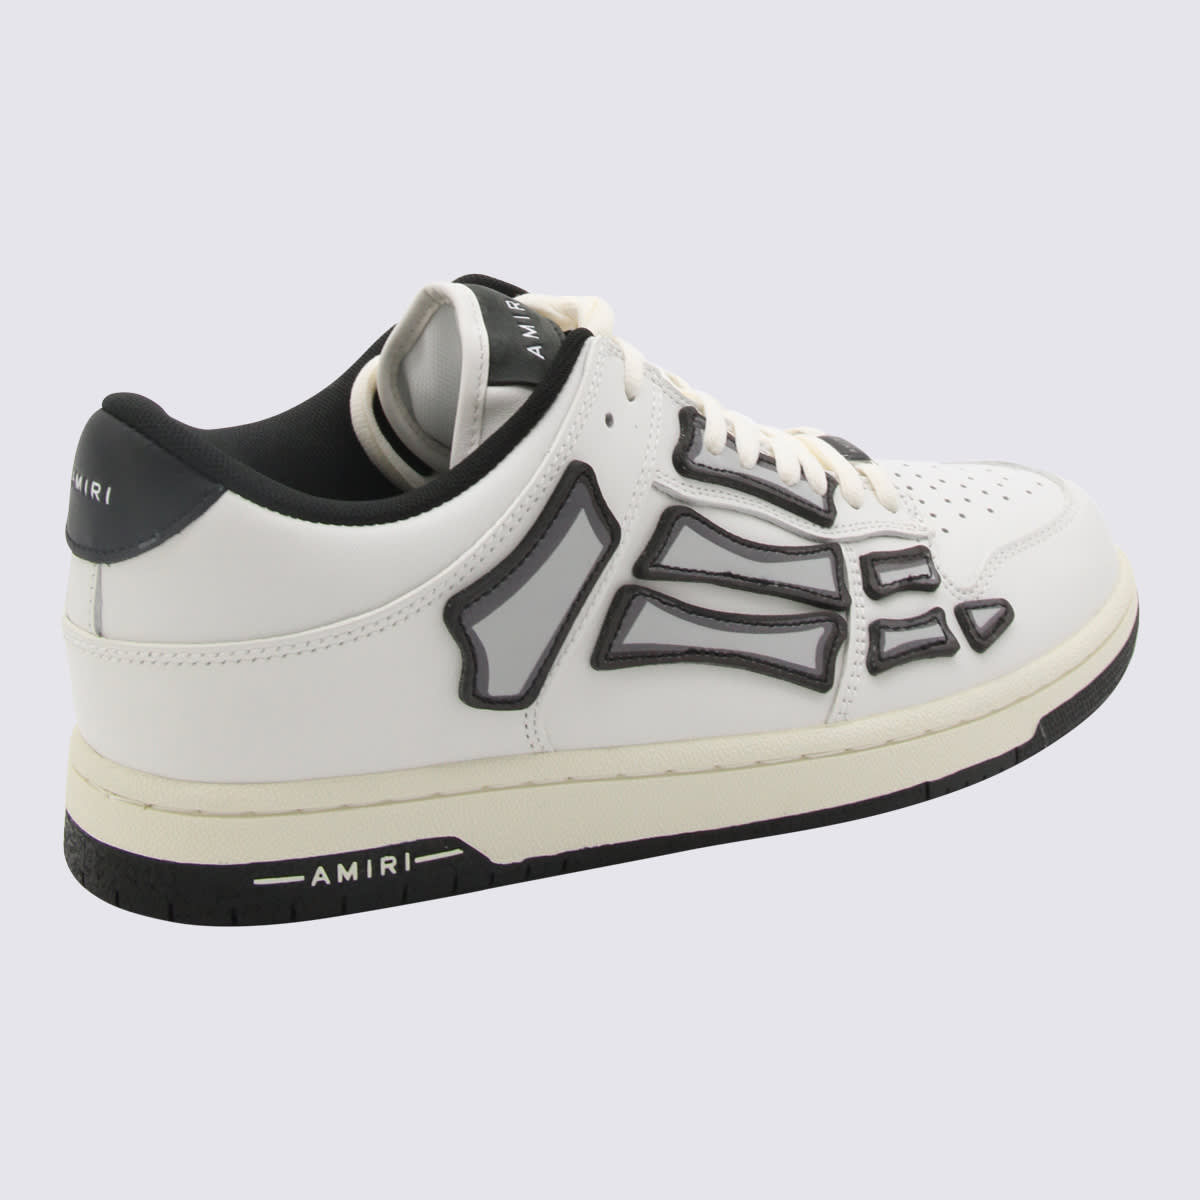 Shop Amiri White And Black Leather Skel Sneakers